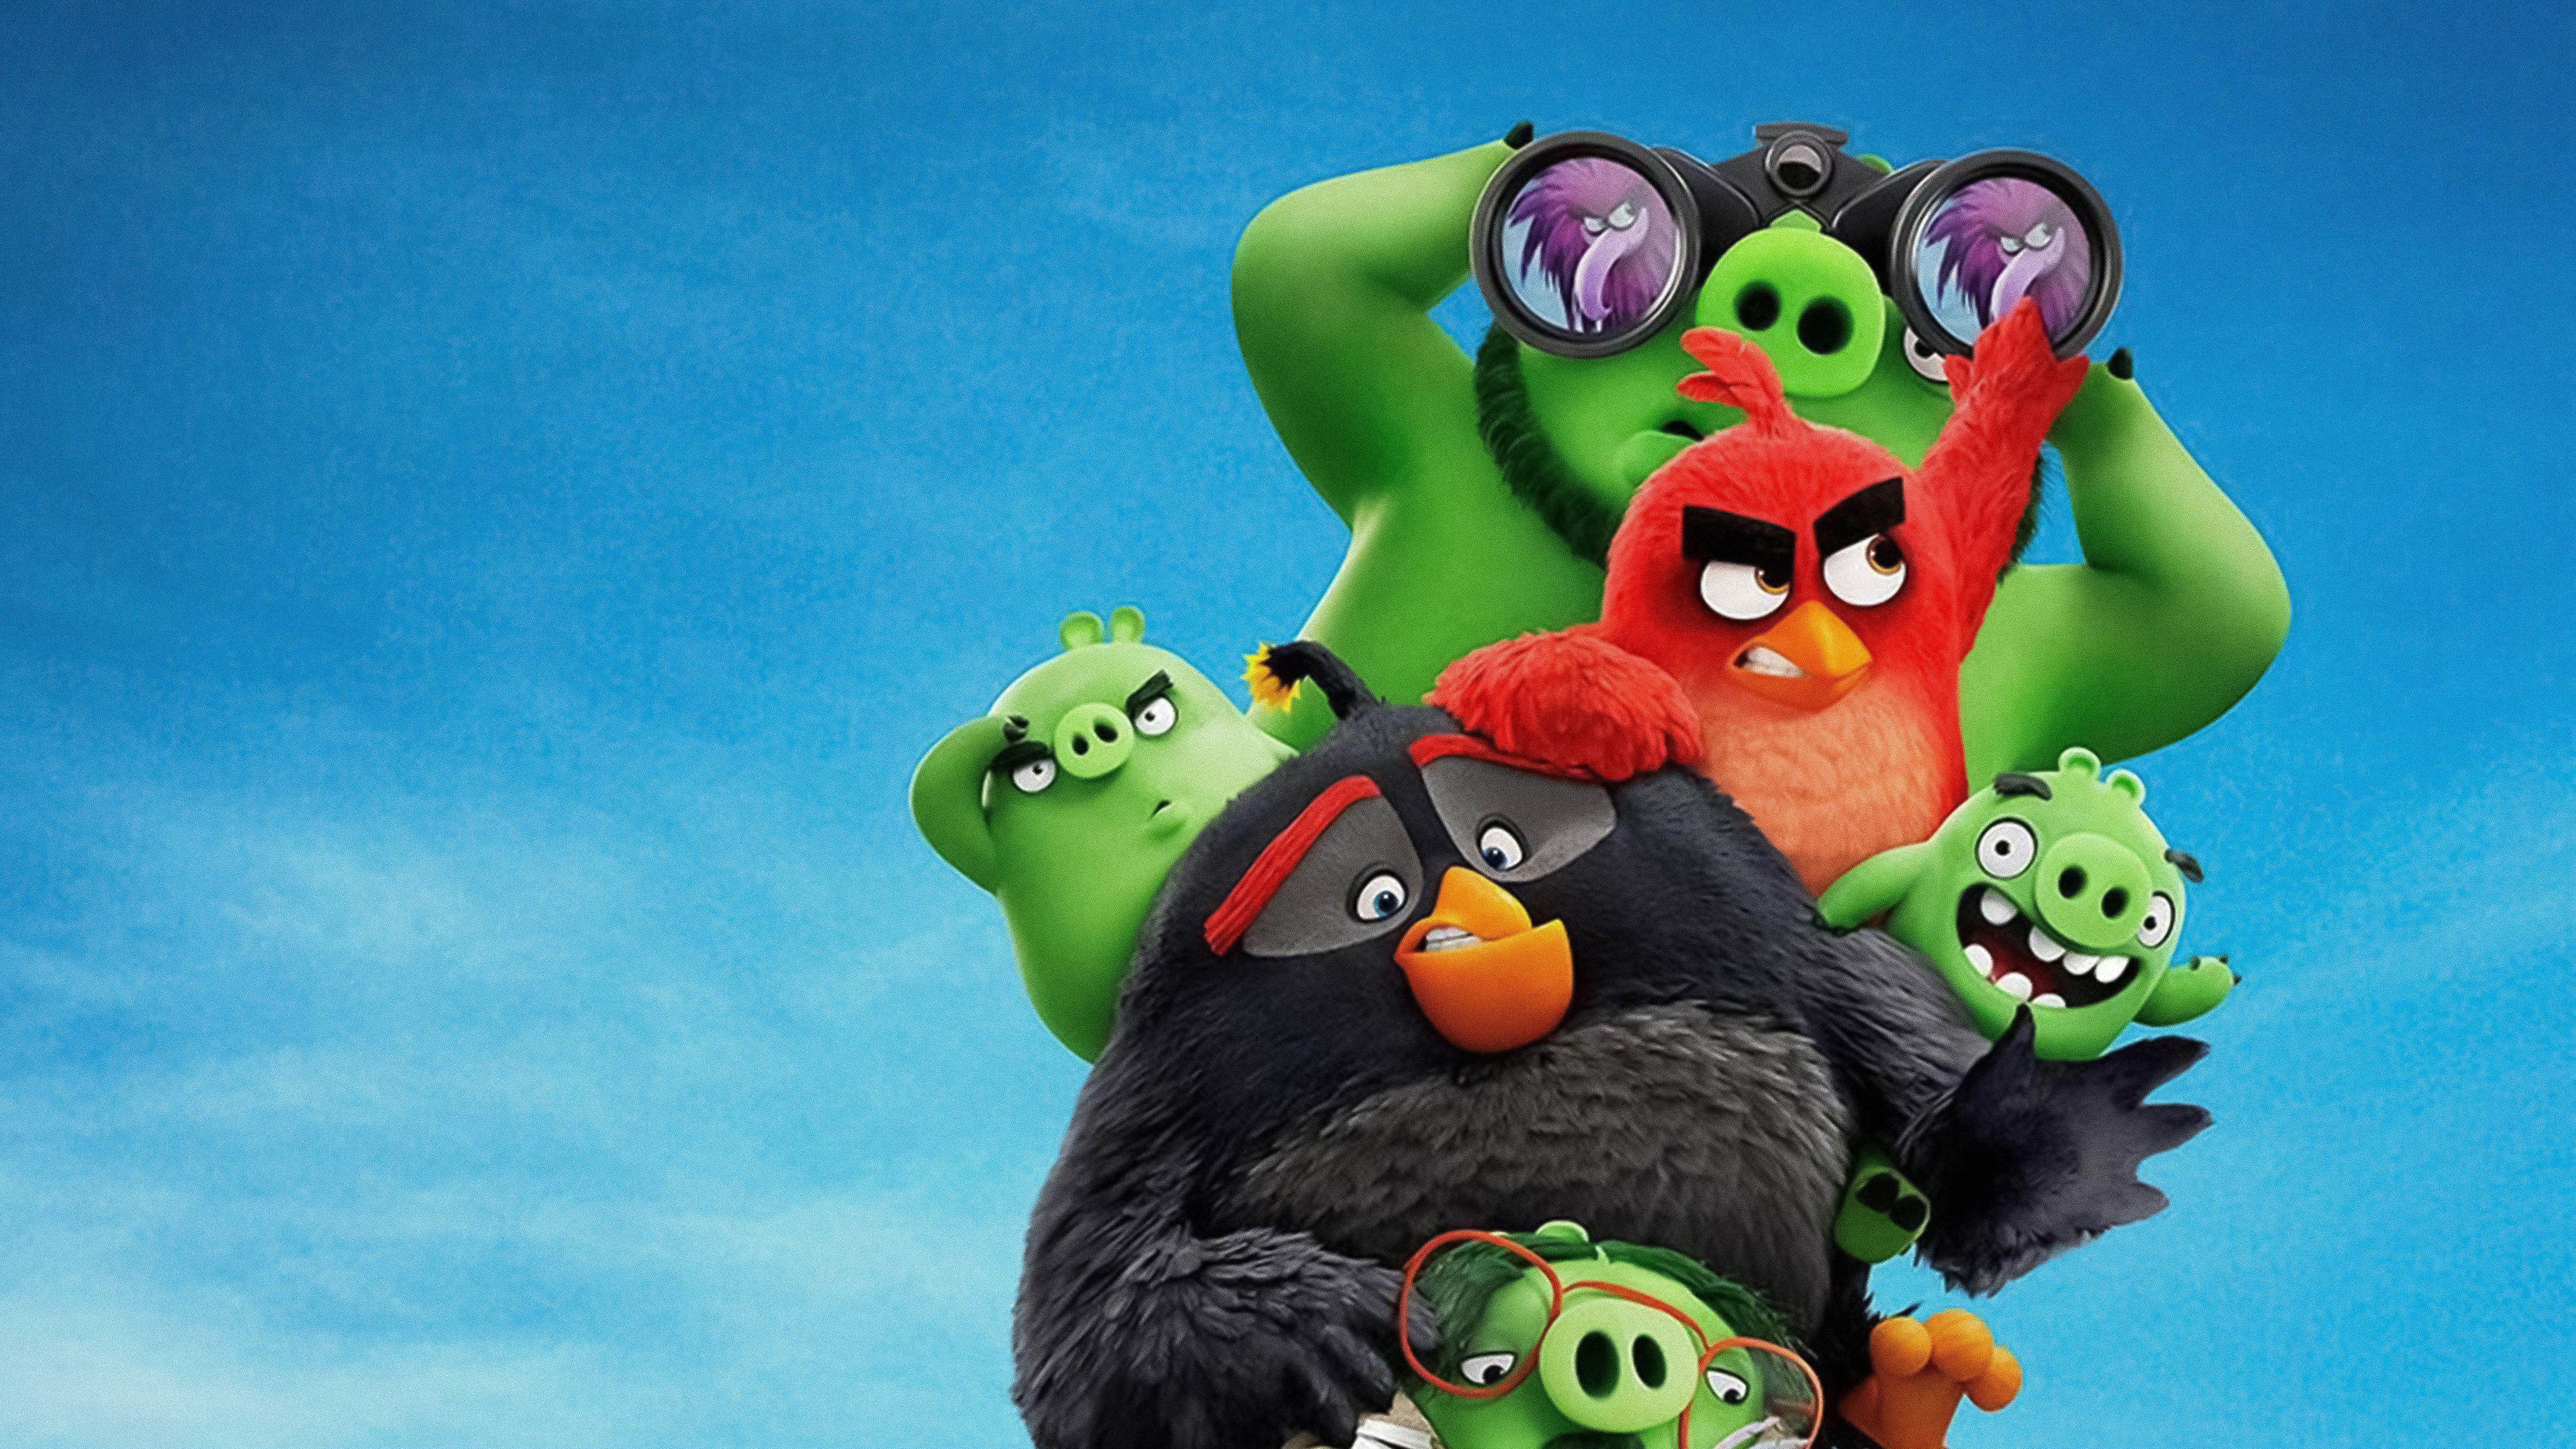 The Angry Birds Movie 2 Wallpaper Free The Angry